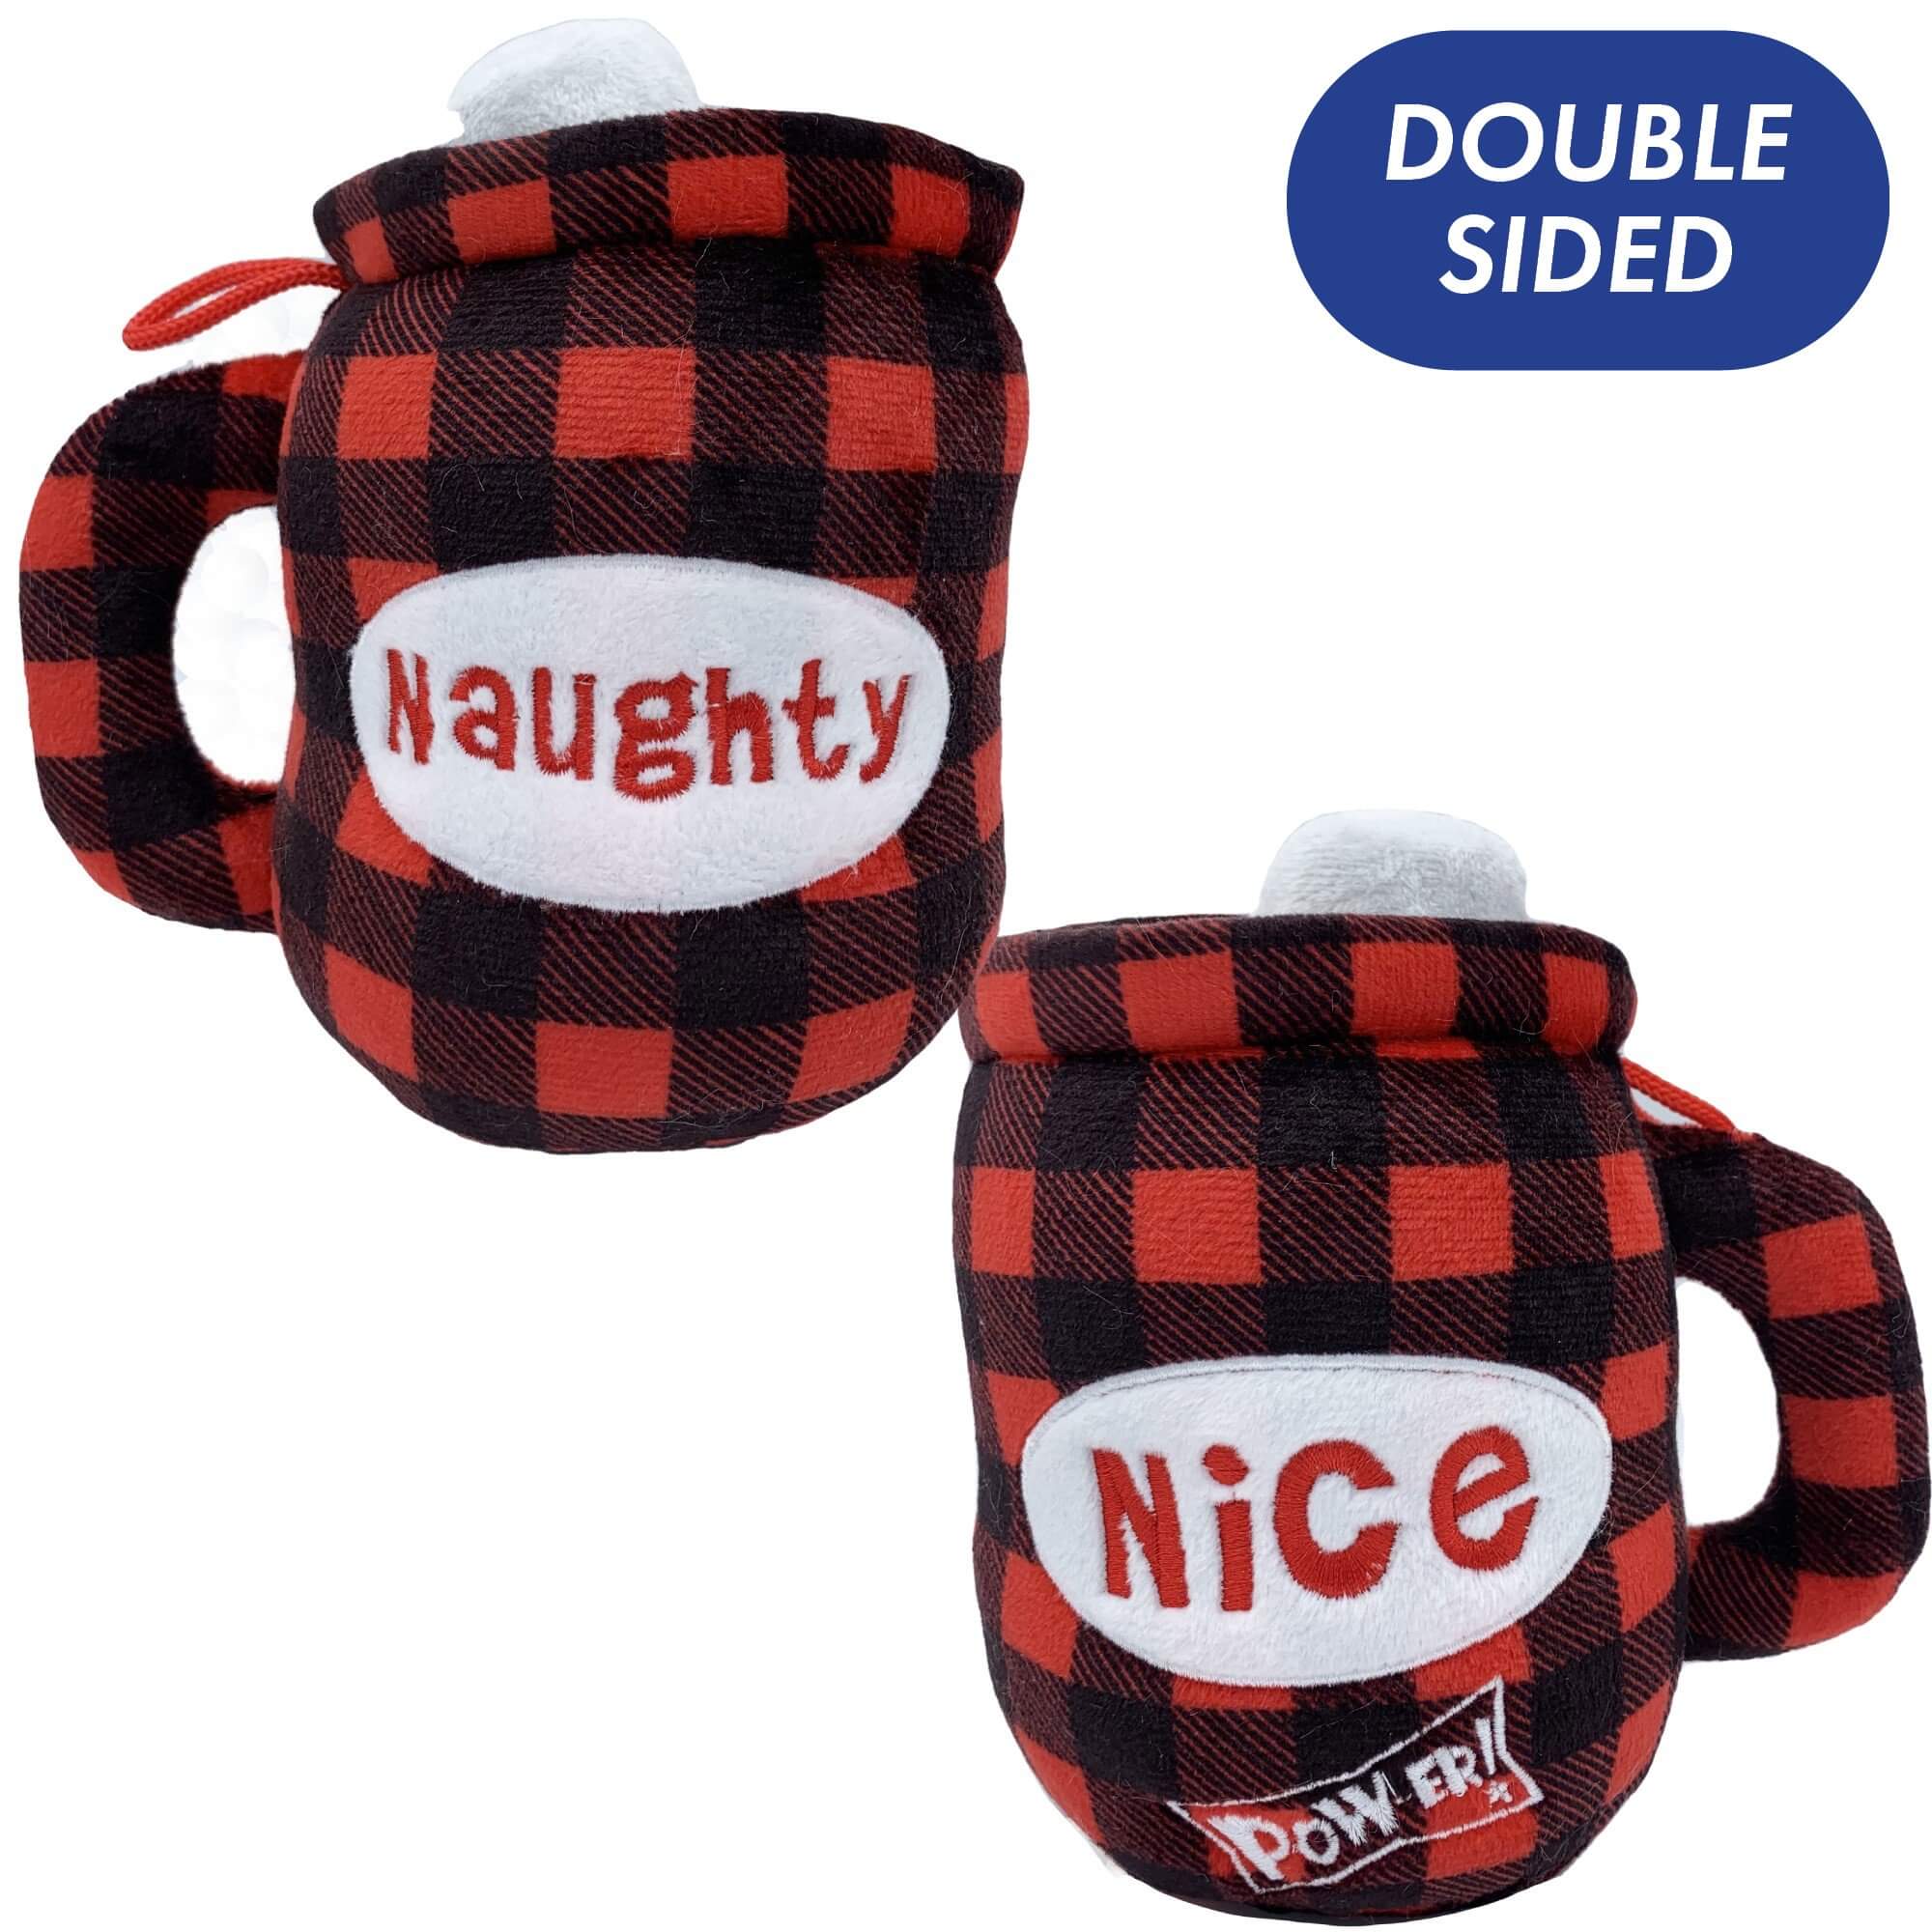 <img src="dog toy.png" alt="red and black coco mug power plush dog toy">